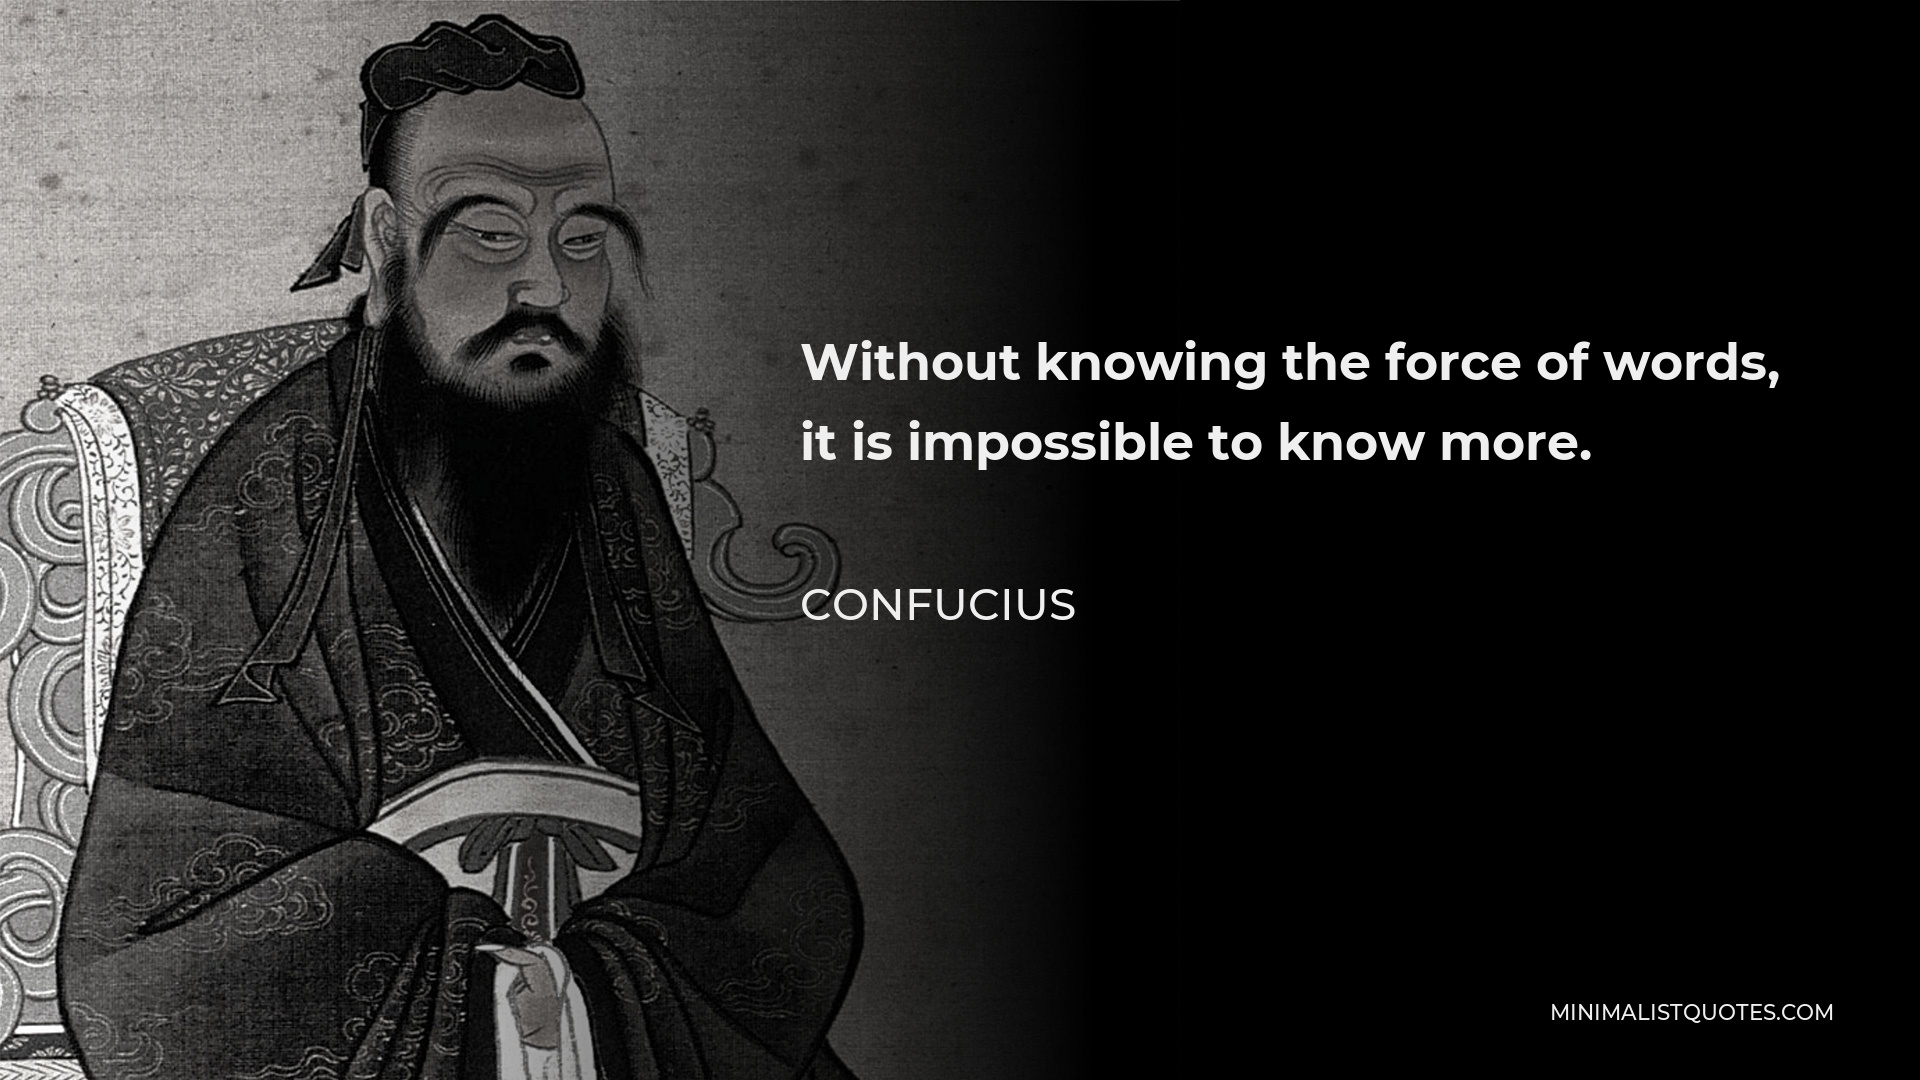 Confucius Quote - Without knowing the force of words, it is impossible to know more.